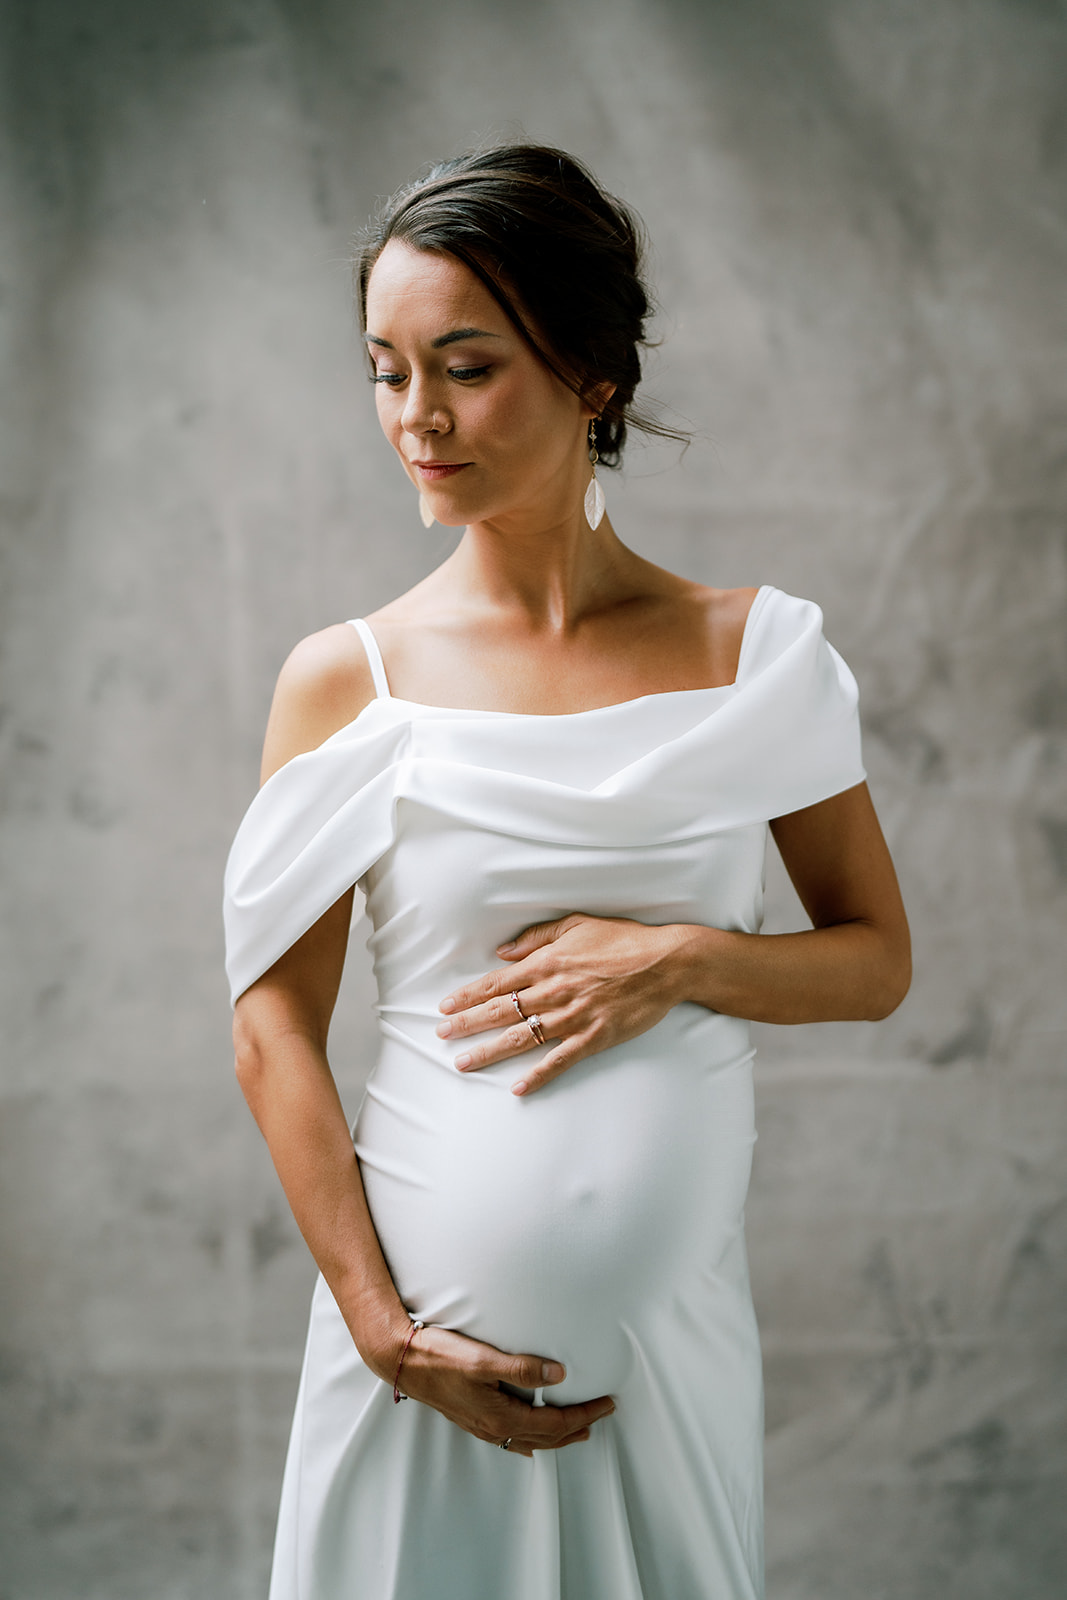 A pregnant woman in a white dress with her hair tied up posing for a photo.